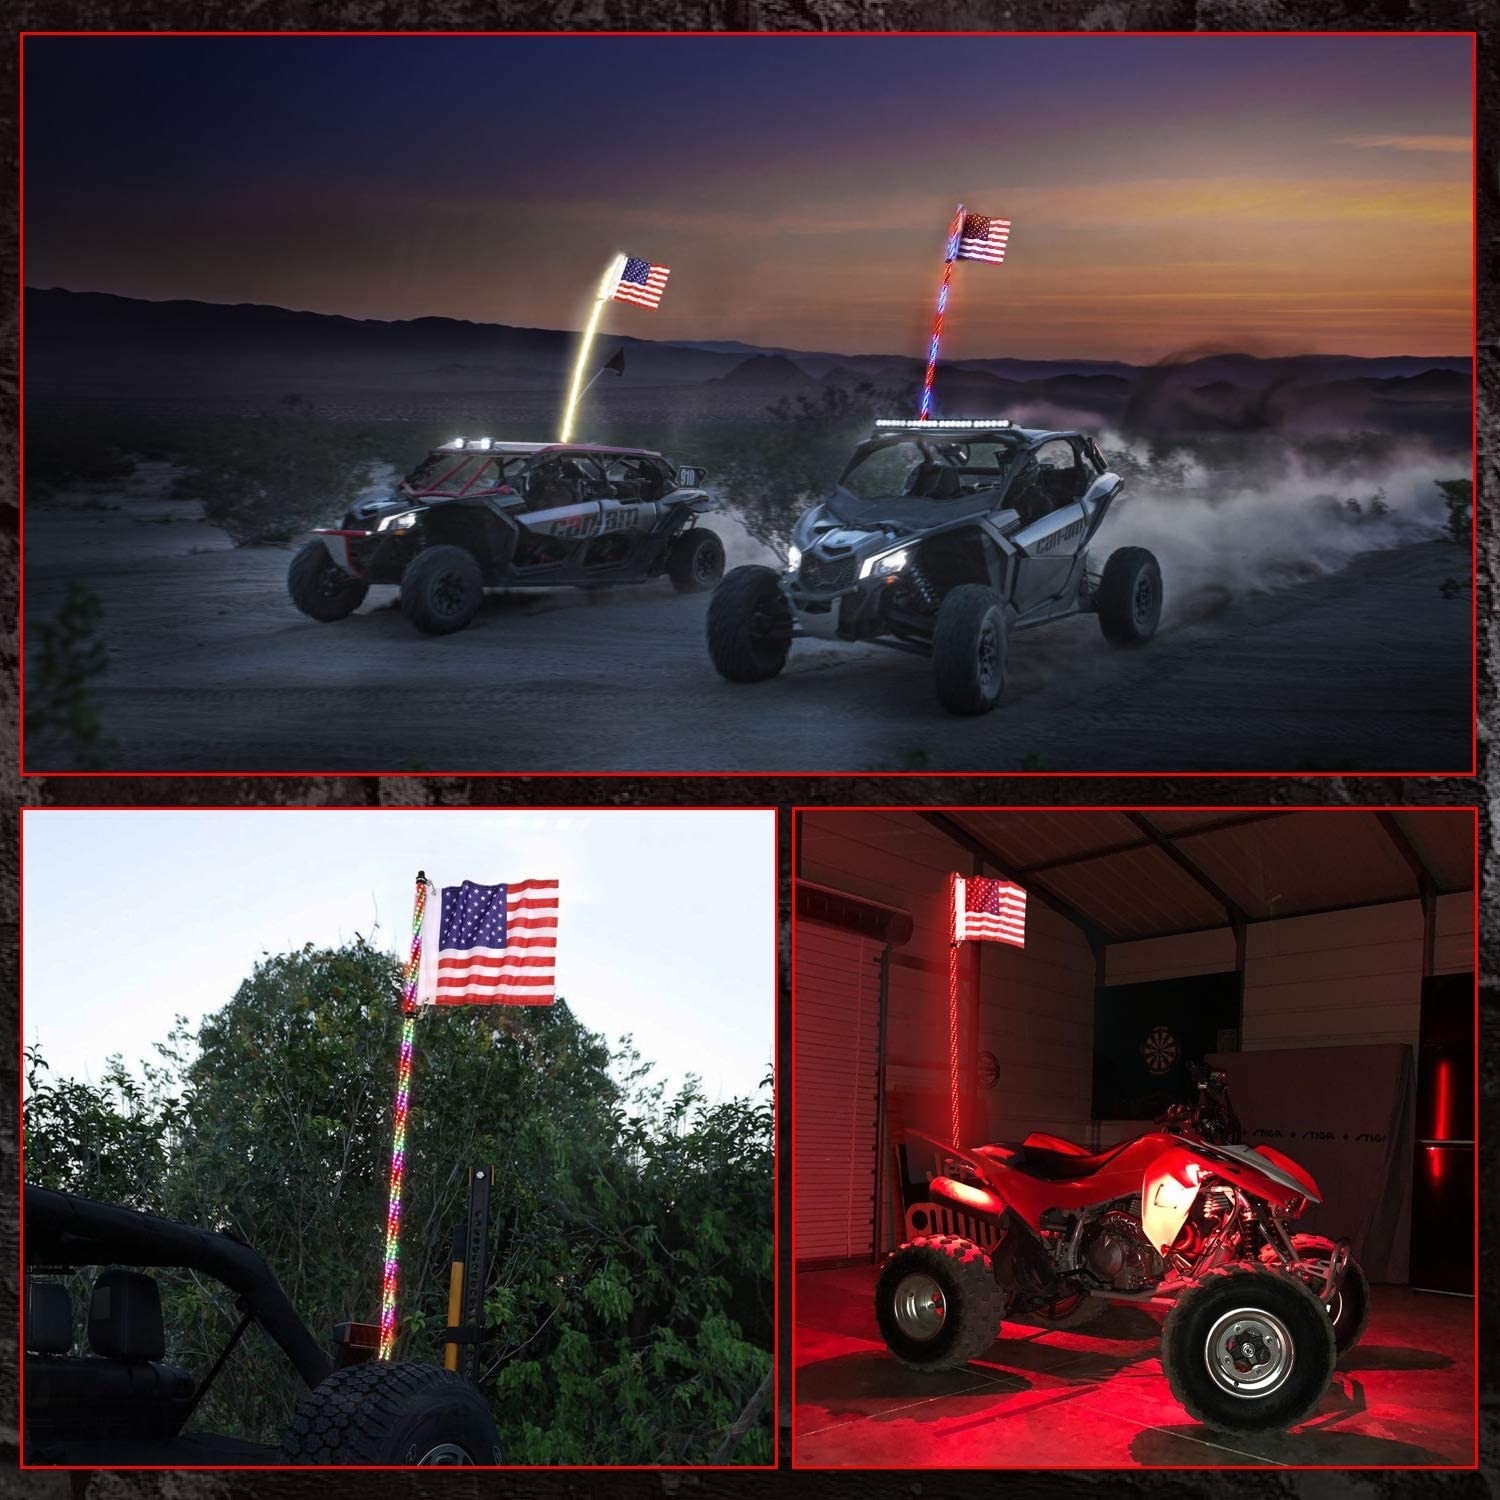 NF NIGHTFIRE 5FT Deluxe 360° Spiral Chasing Dancing Lighted Whip LED Antenna Light Whips for ATV Safety Flag Light UTV LED Whip for Polaris RZR Can Am Maverick X3 w/Remote Control 59 Inch / 2 pc 